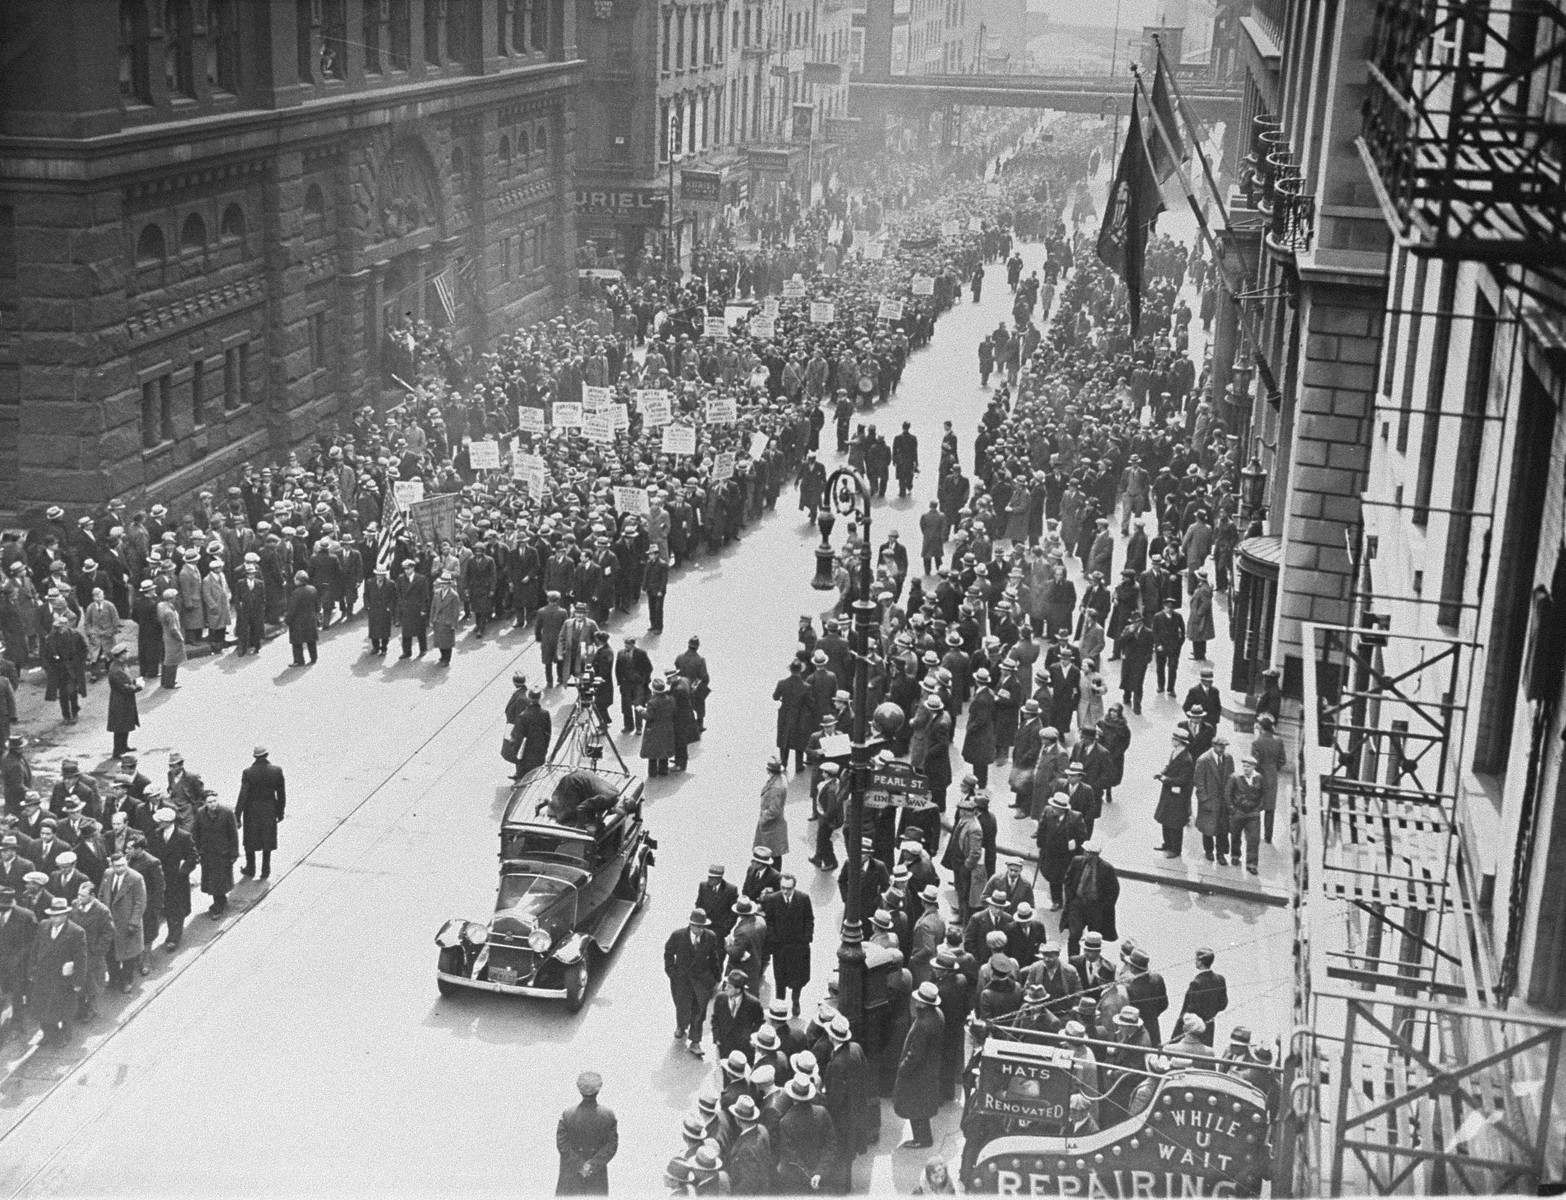 Members of the American communist party participate in a march through the streets of lower Manhattan to protest against the Nazi persecution of German Jews.